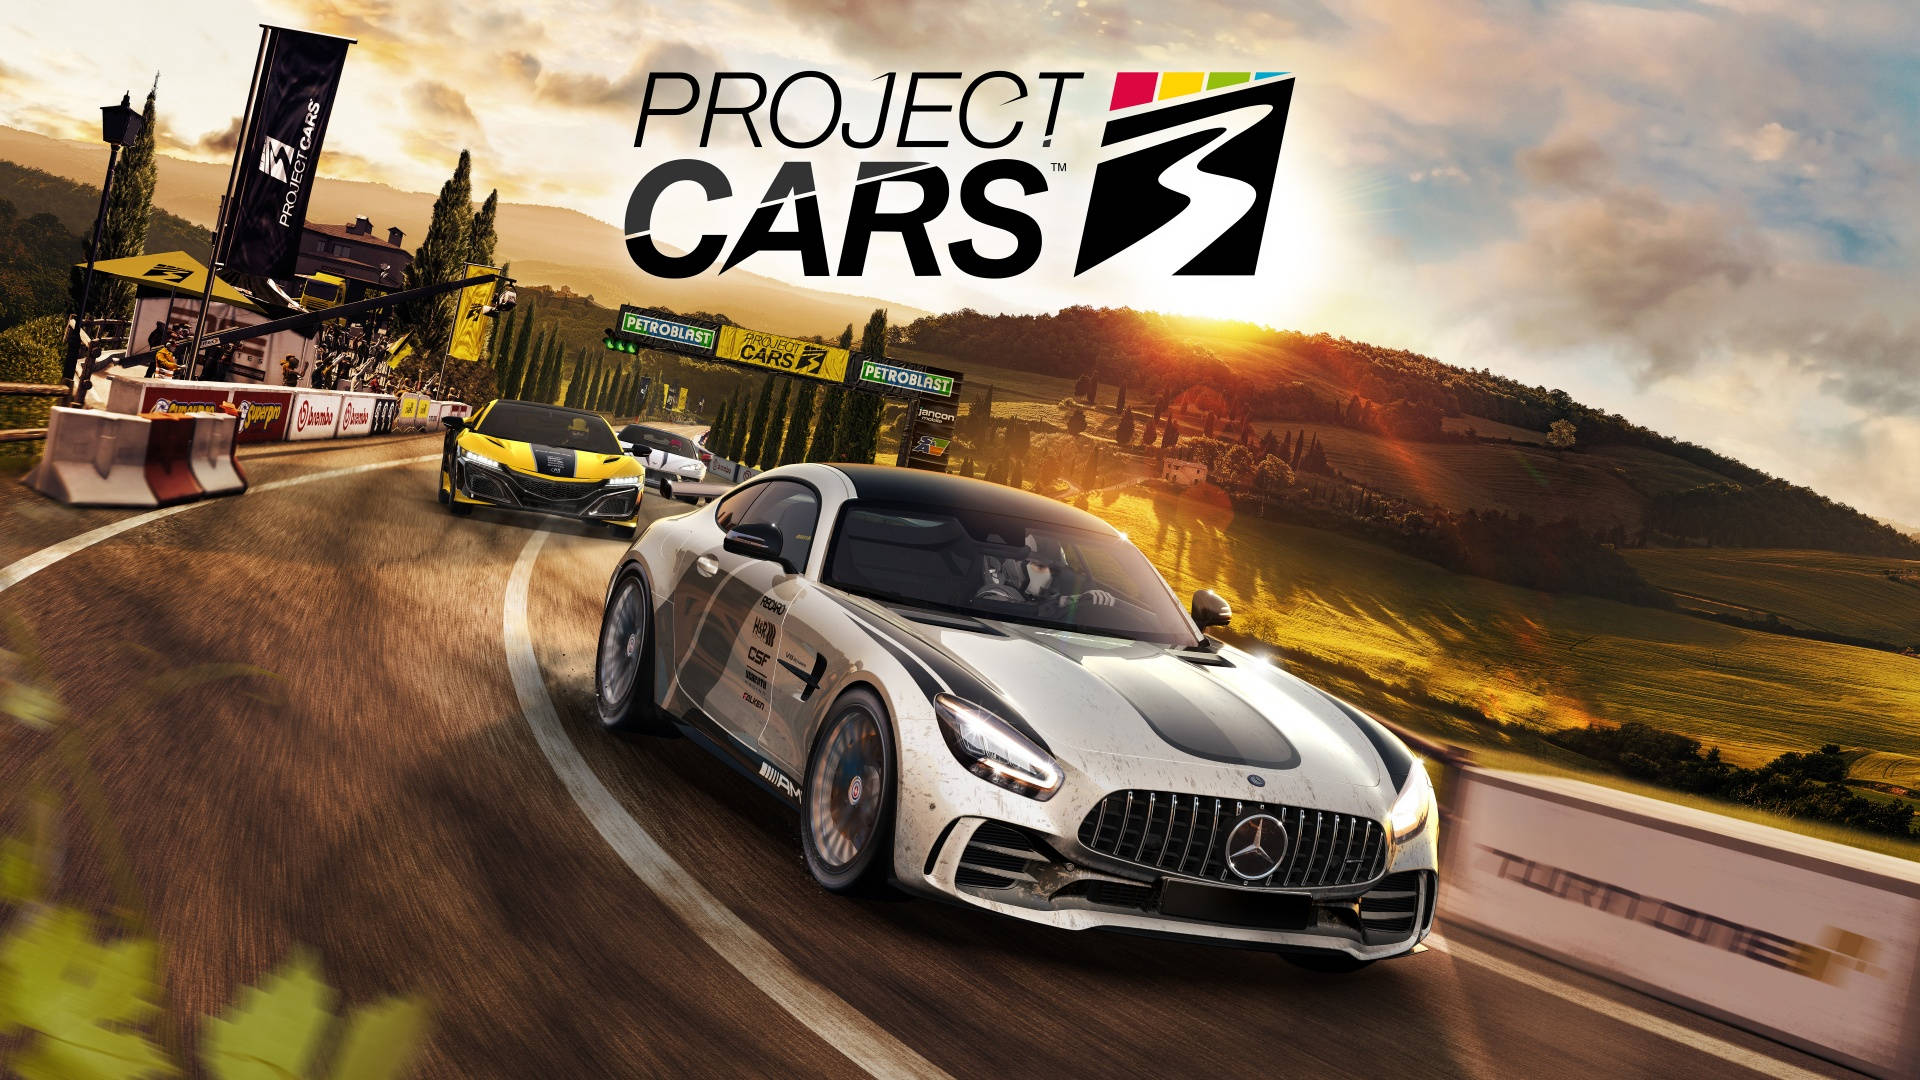 Mercedes Car Project Cars 3 Background